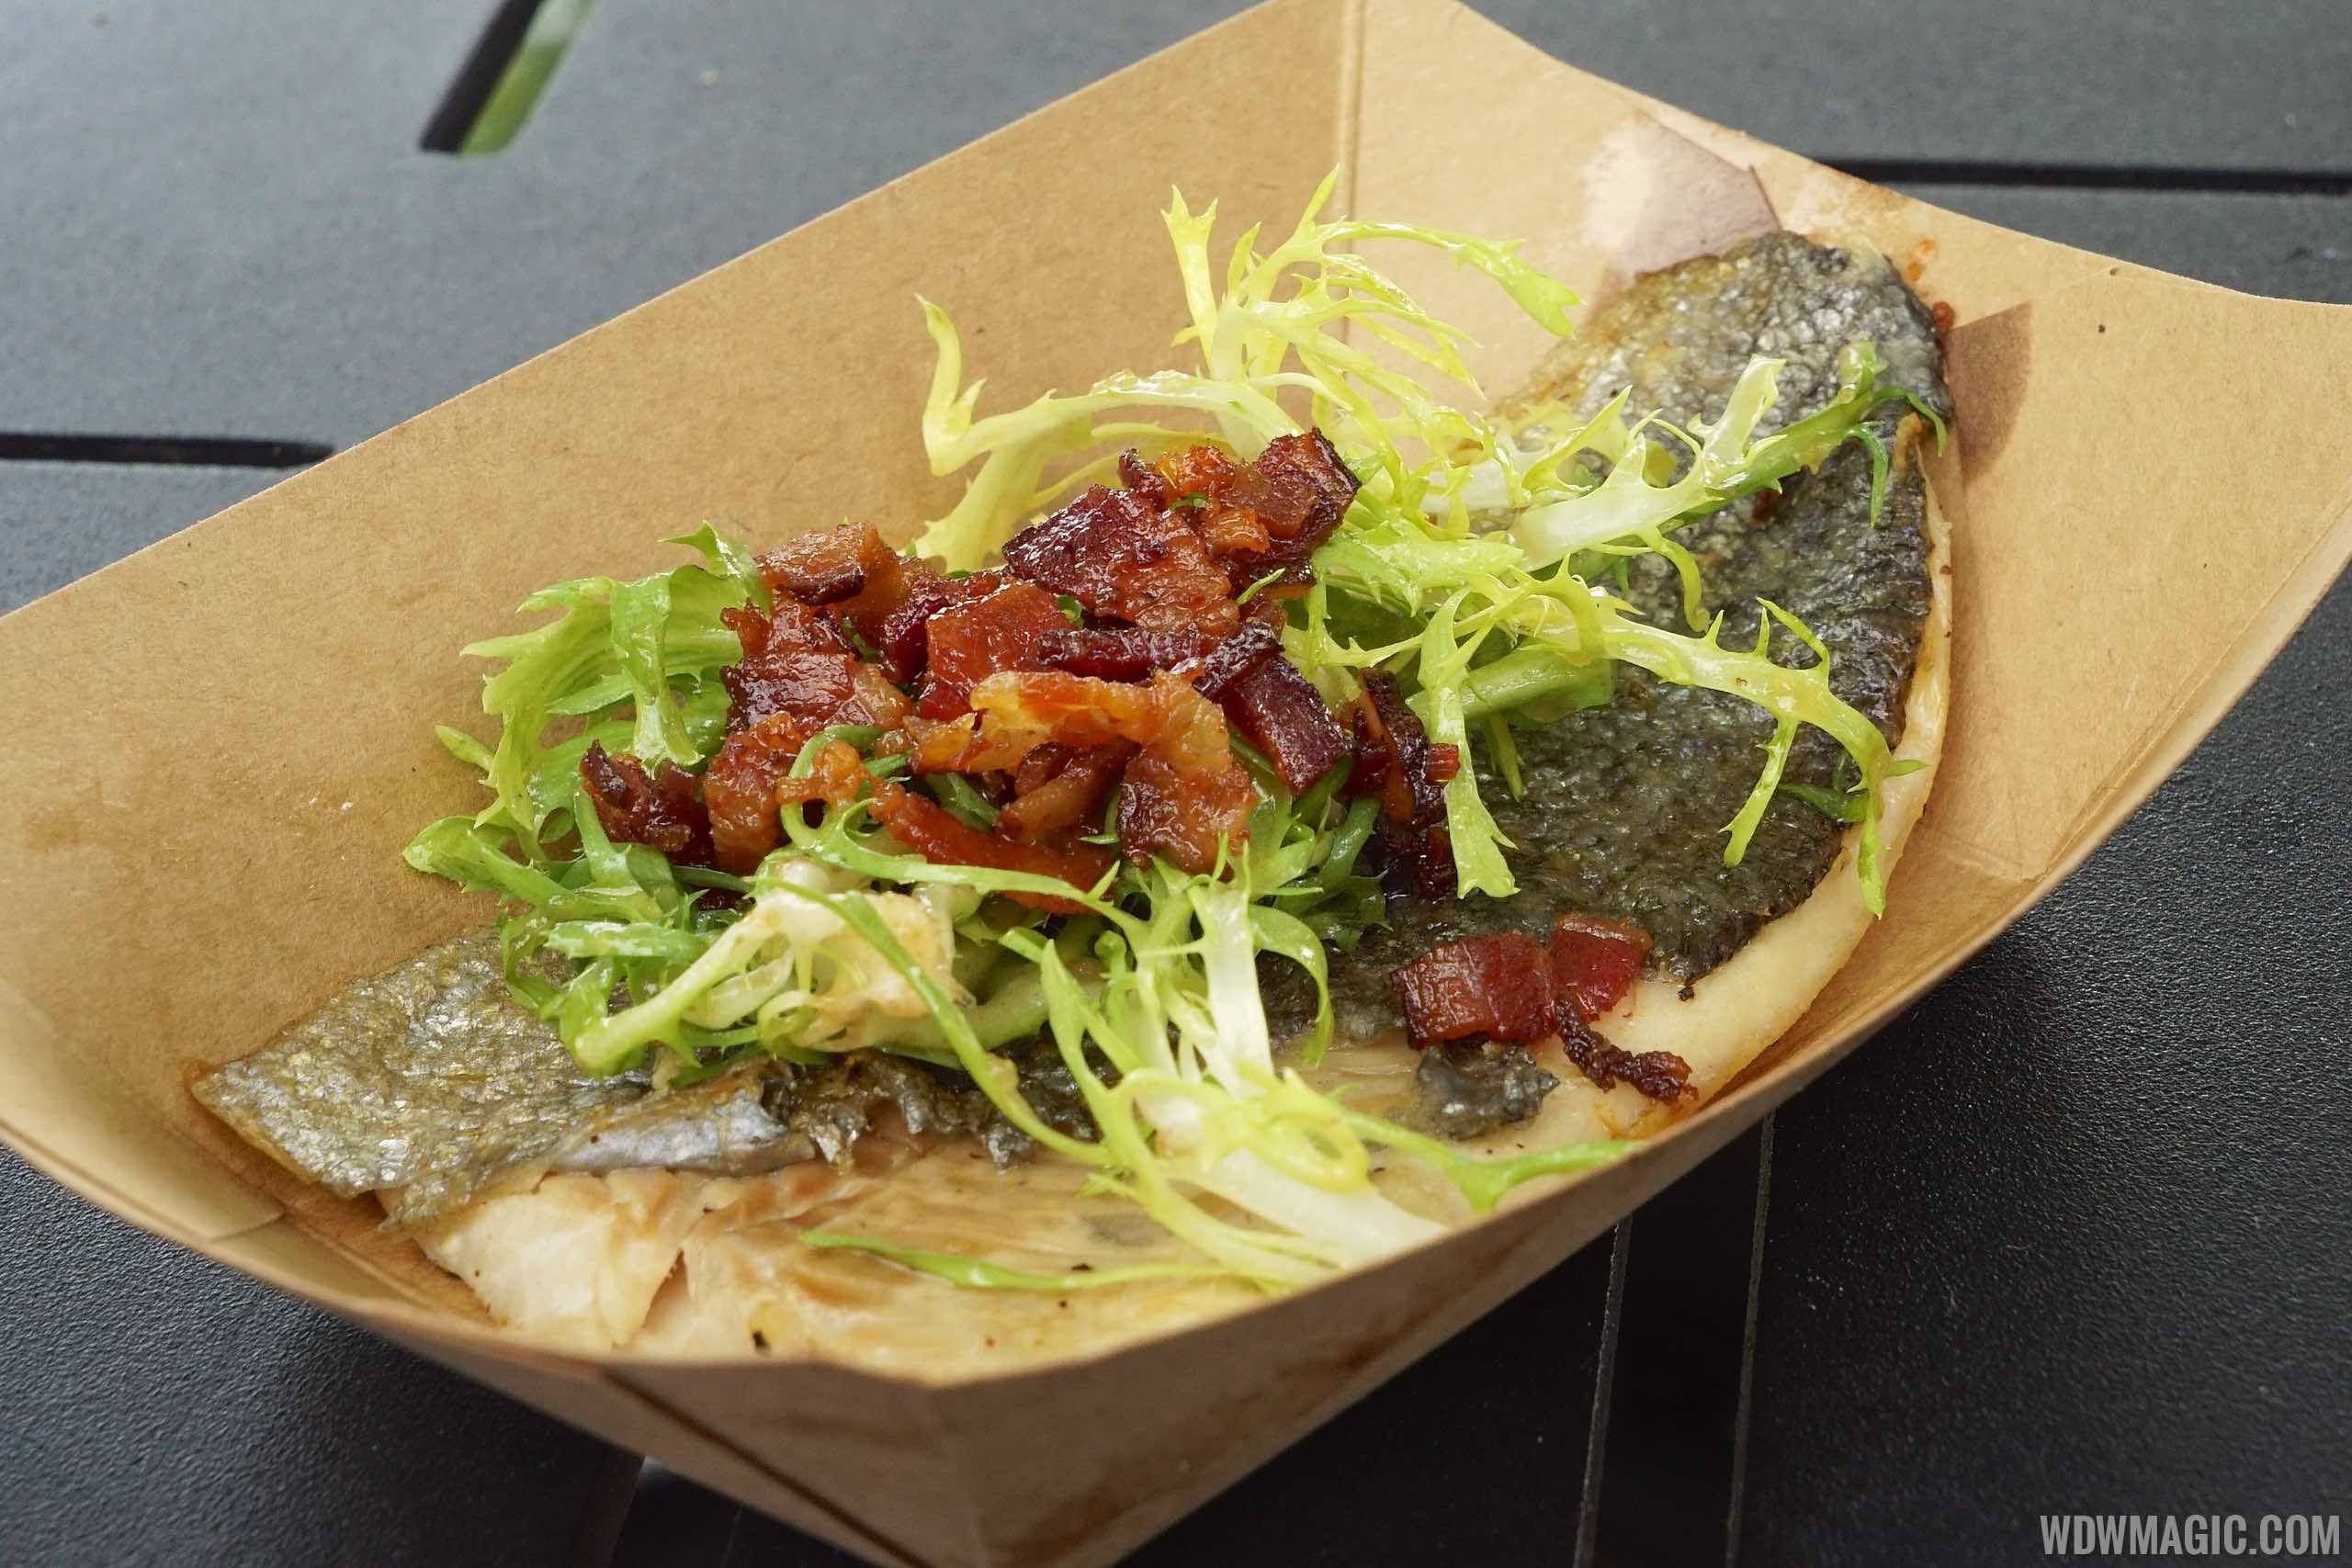 Seared rainbow trout at the Canada Pavilion kiosk